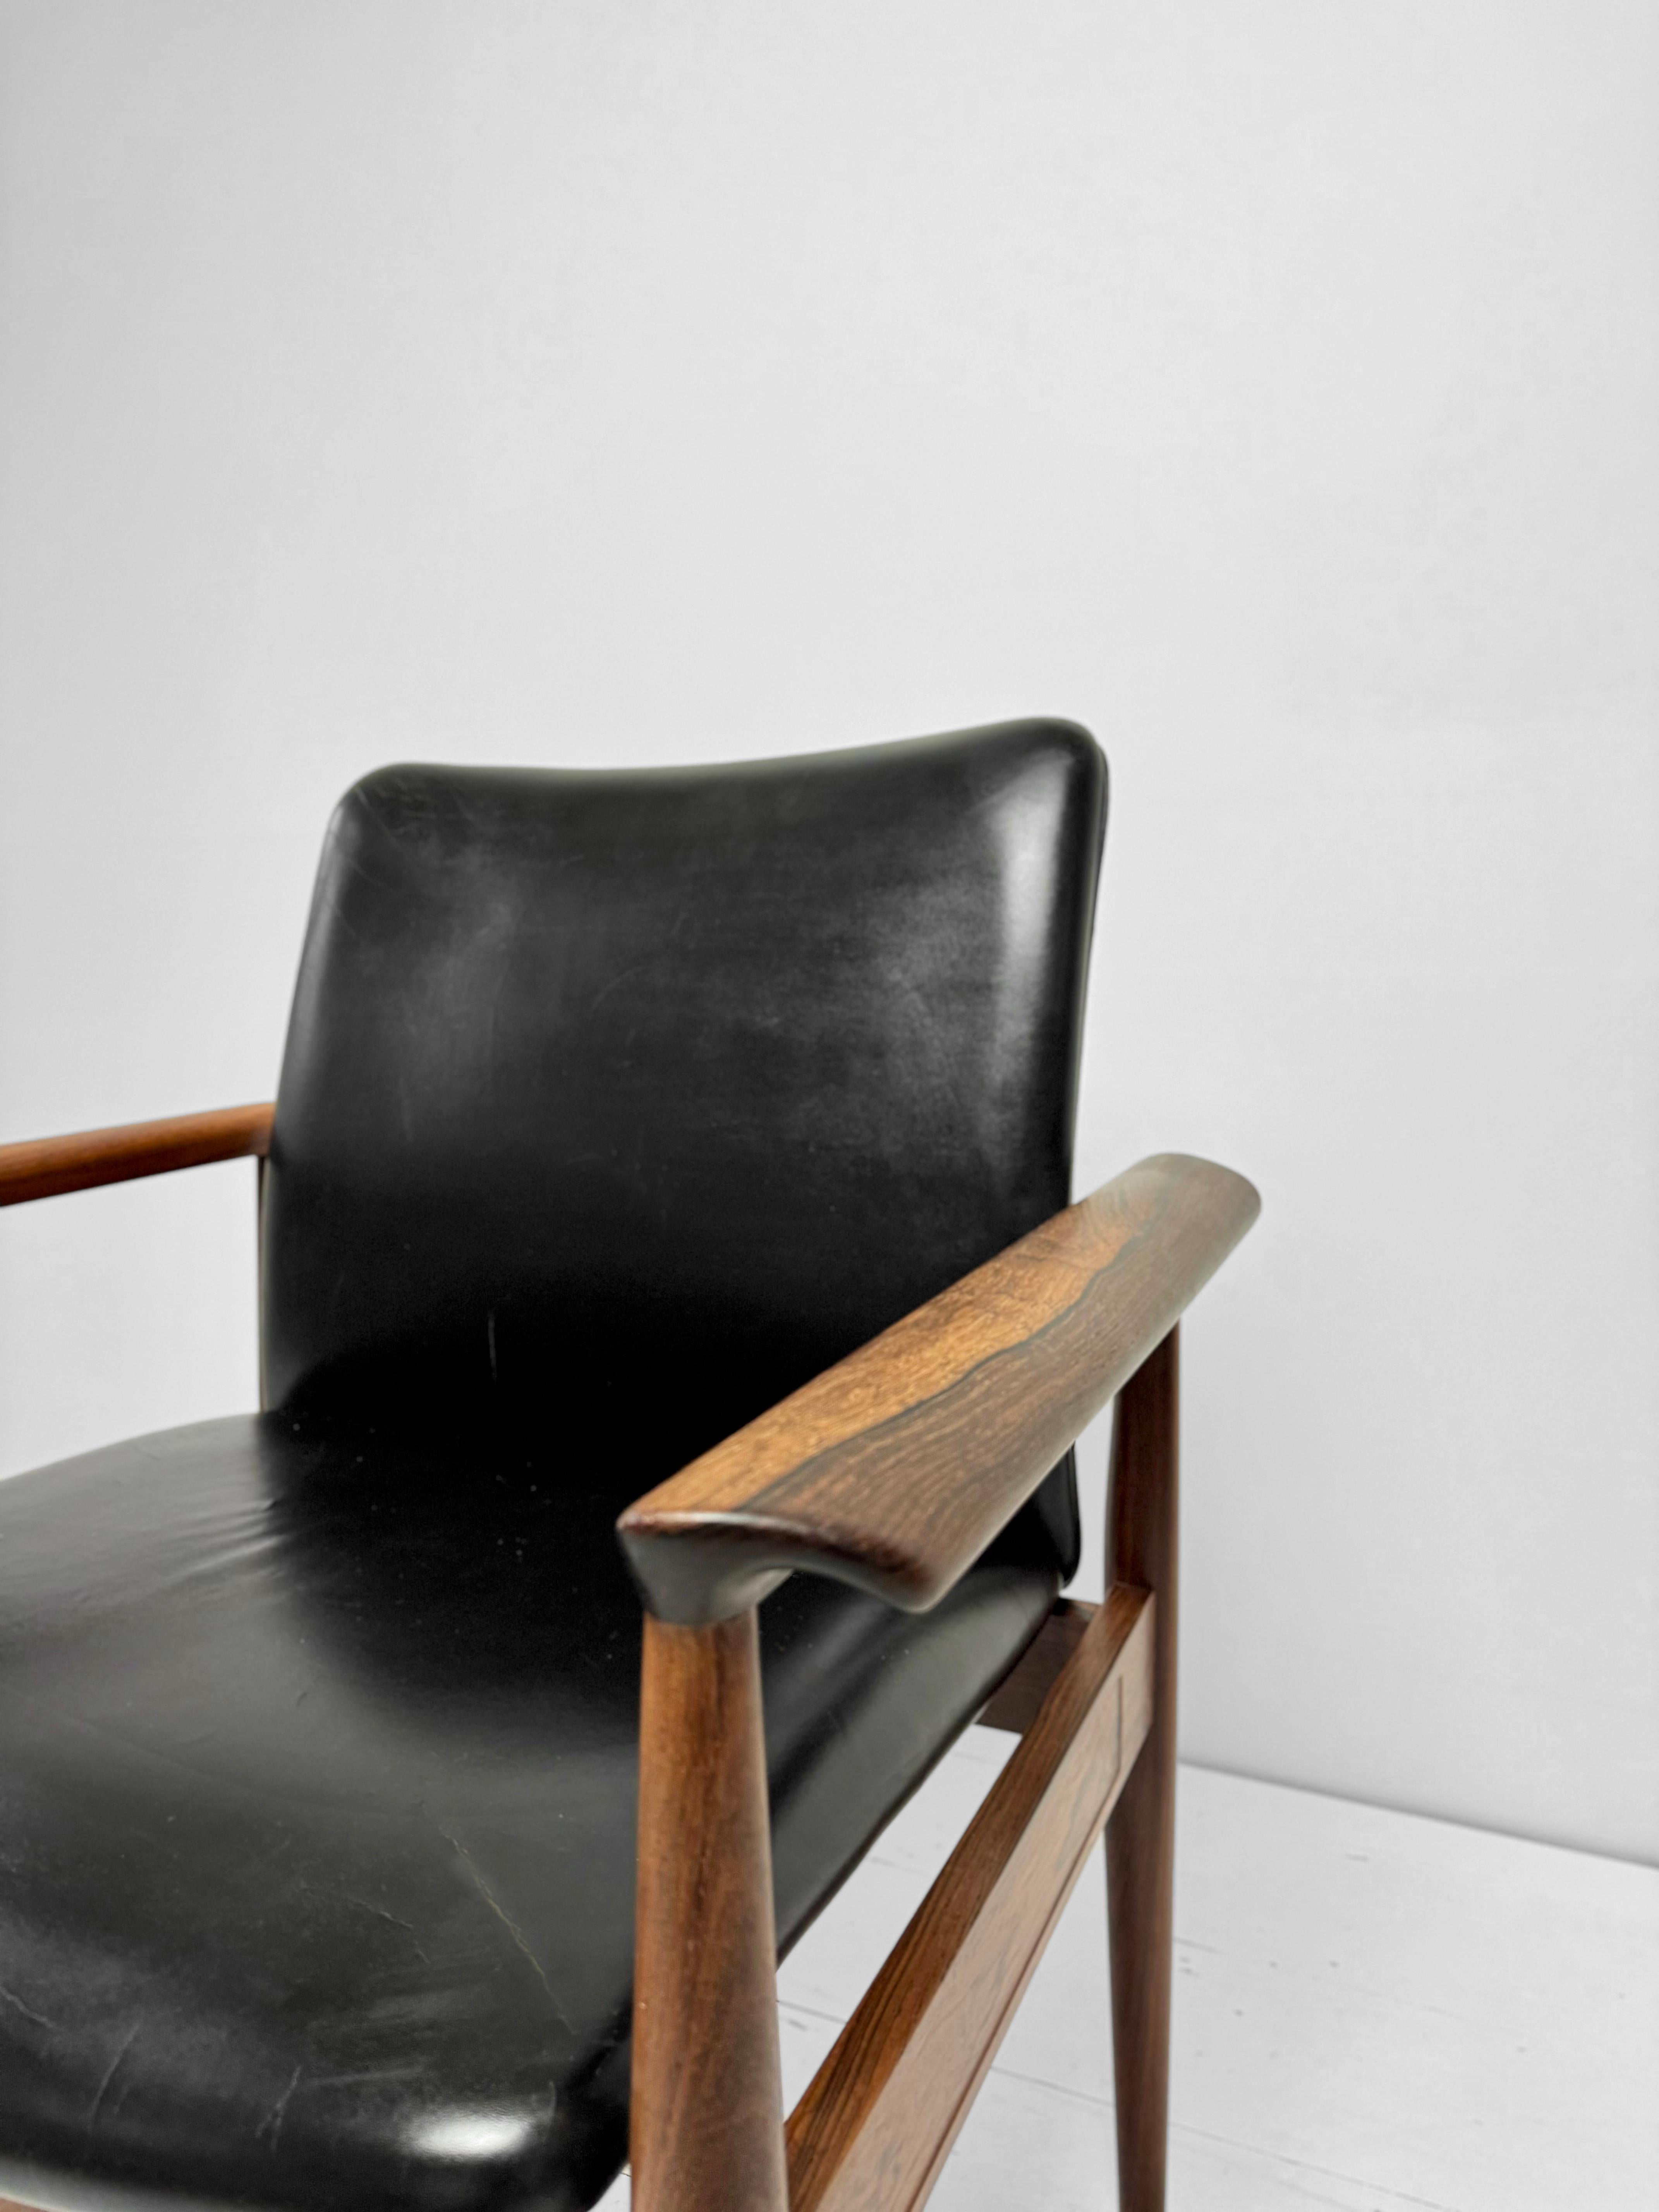 Set of Diplomat Armchairs in Rosewood and Leather by Finn Juhl, Denmark c.1960's For Sale 3